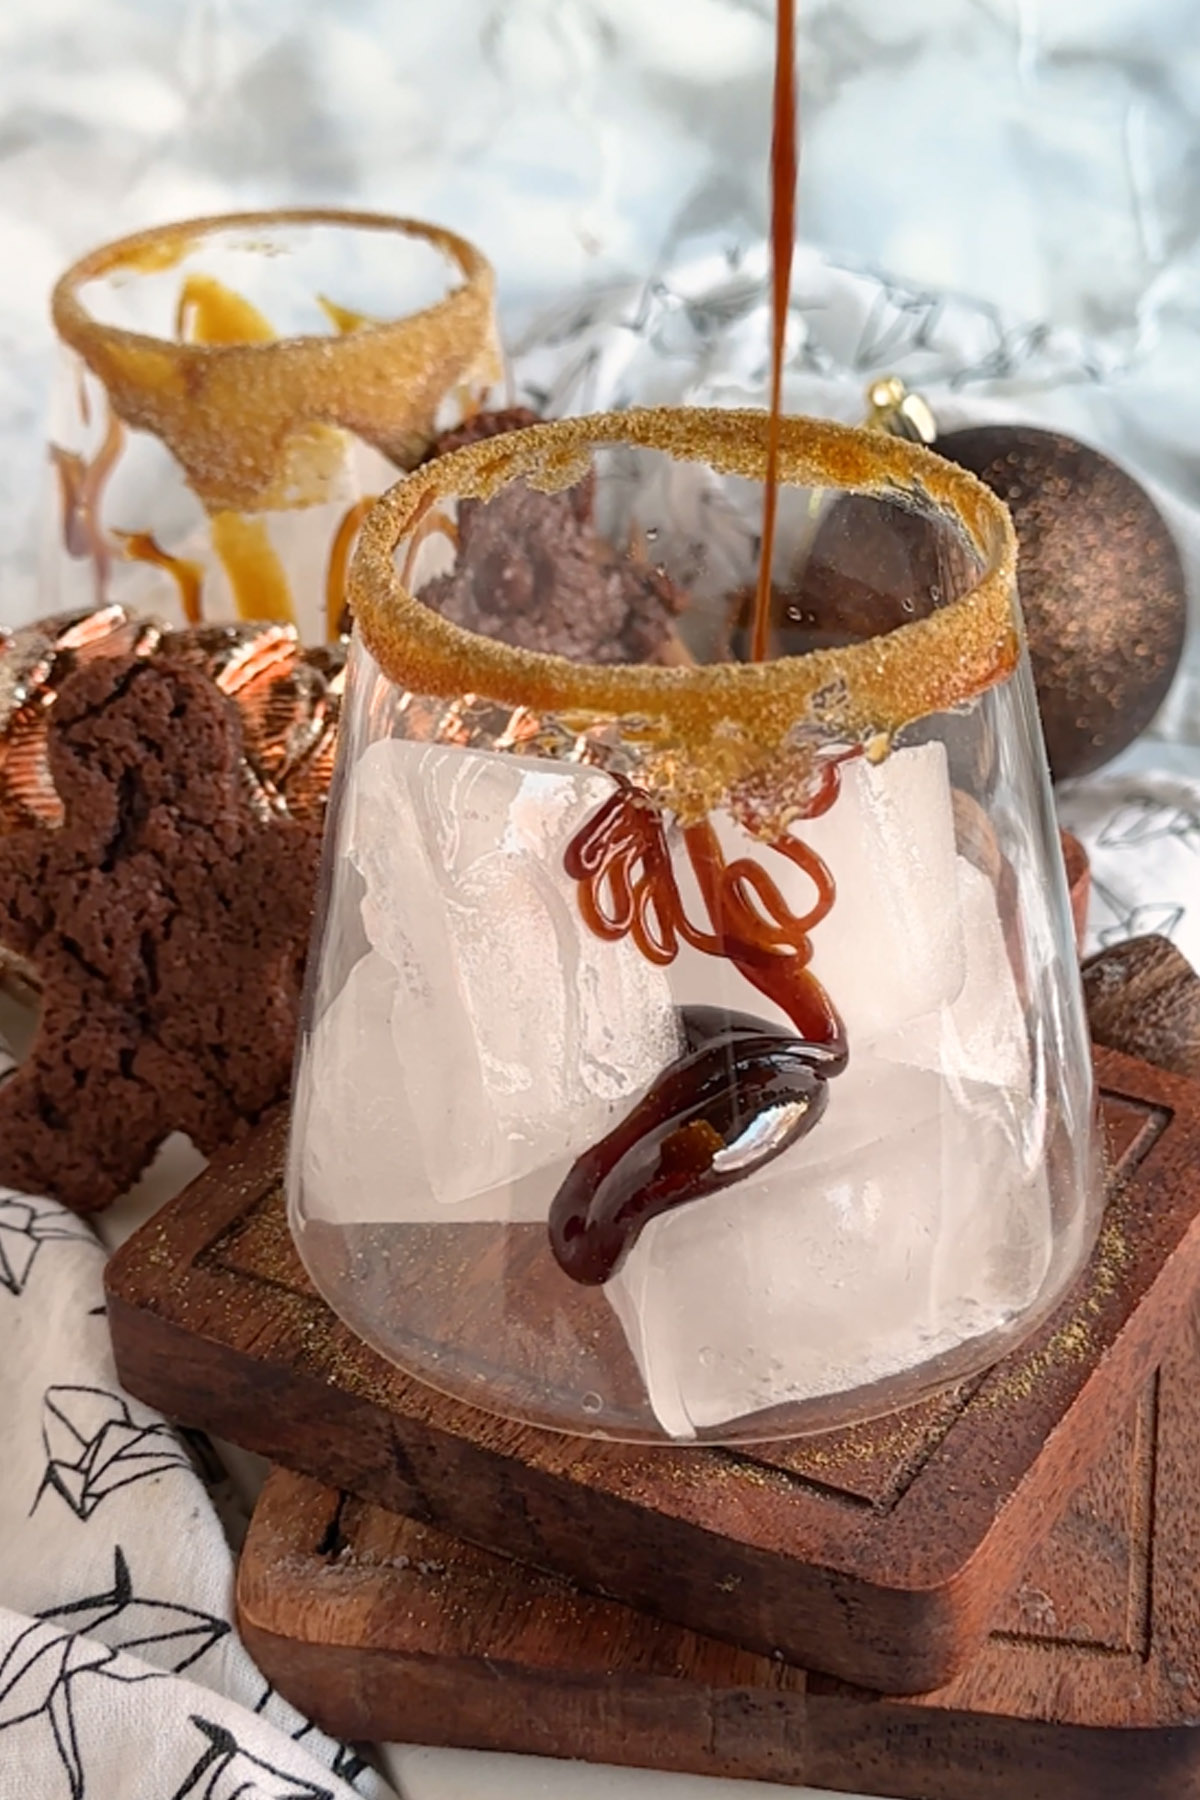 Gingerbread syrup is drizzled into a rimmed glass with ice.